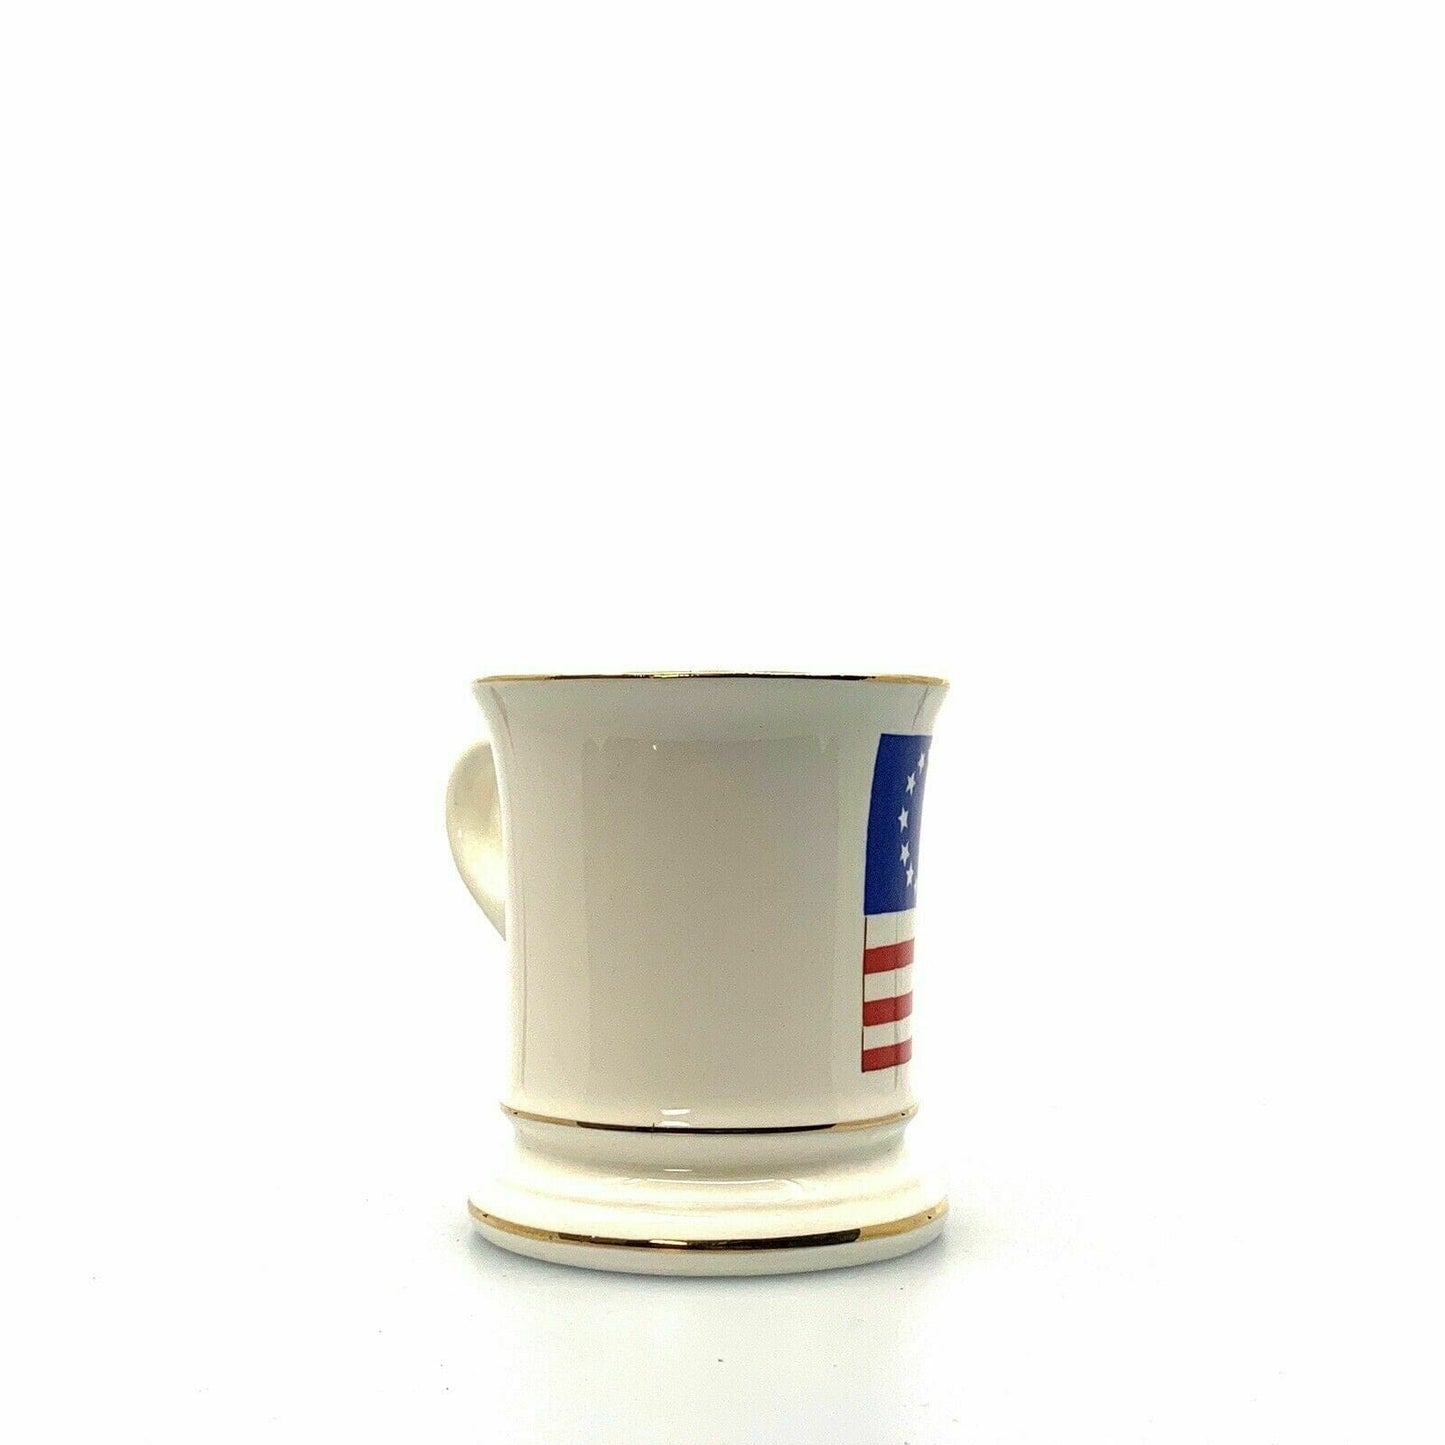 Liberty Bell and American Flag Porcelain Coffee Cup Mug Gold Rimmed EUC